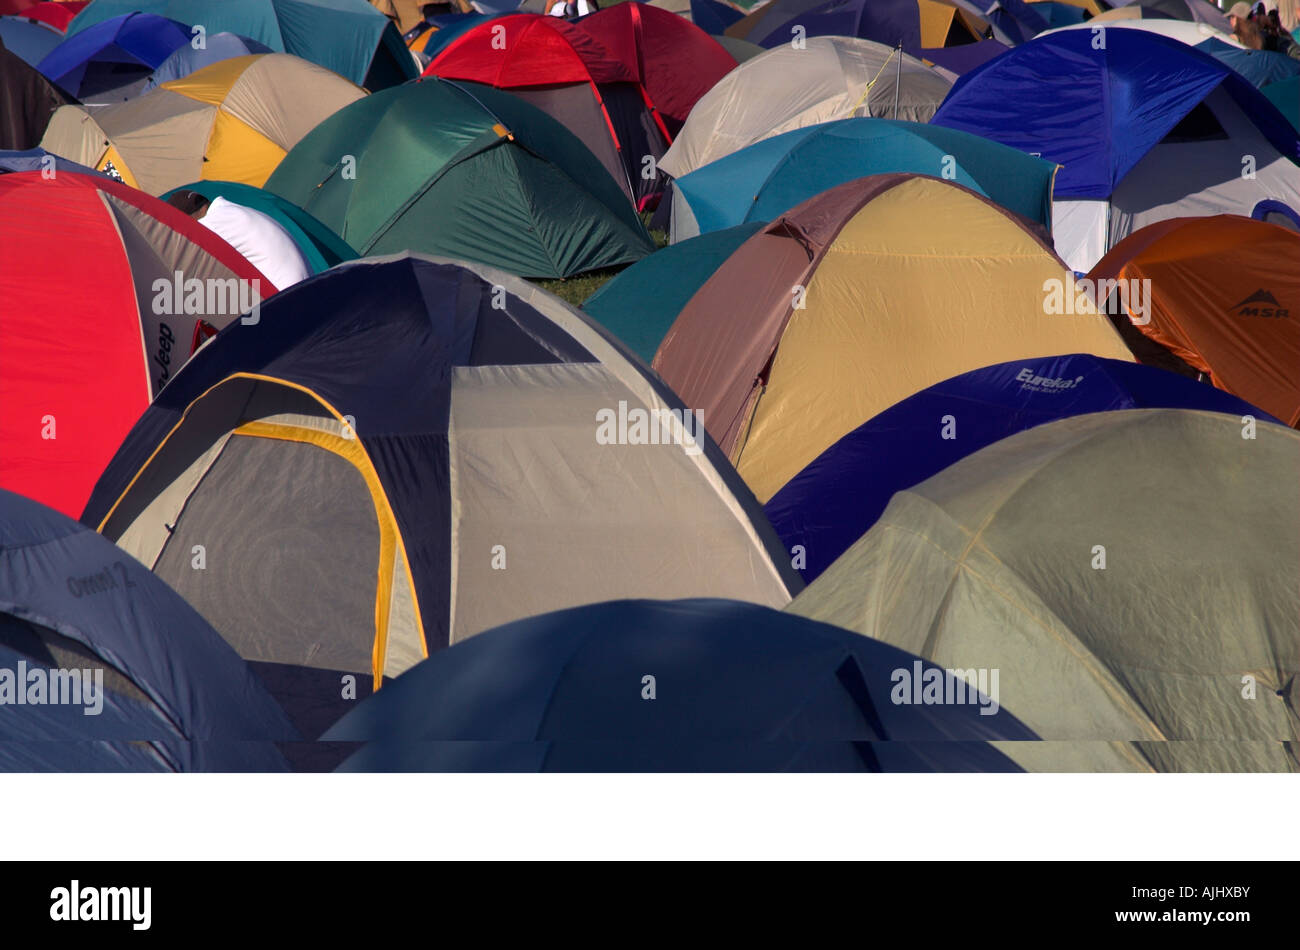 Closely packed tents at a campsite Stock Photo